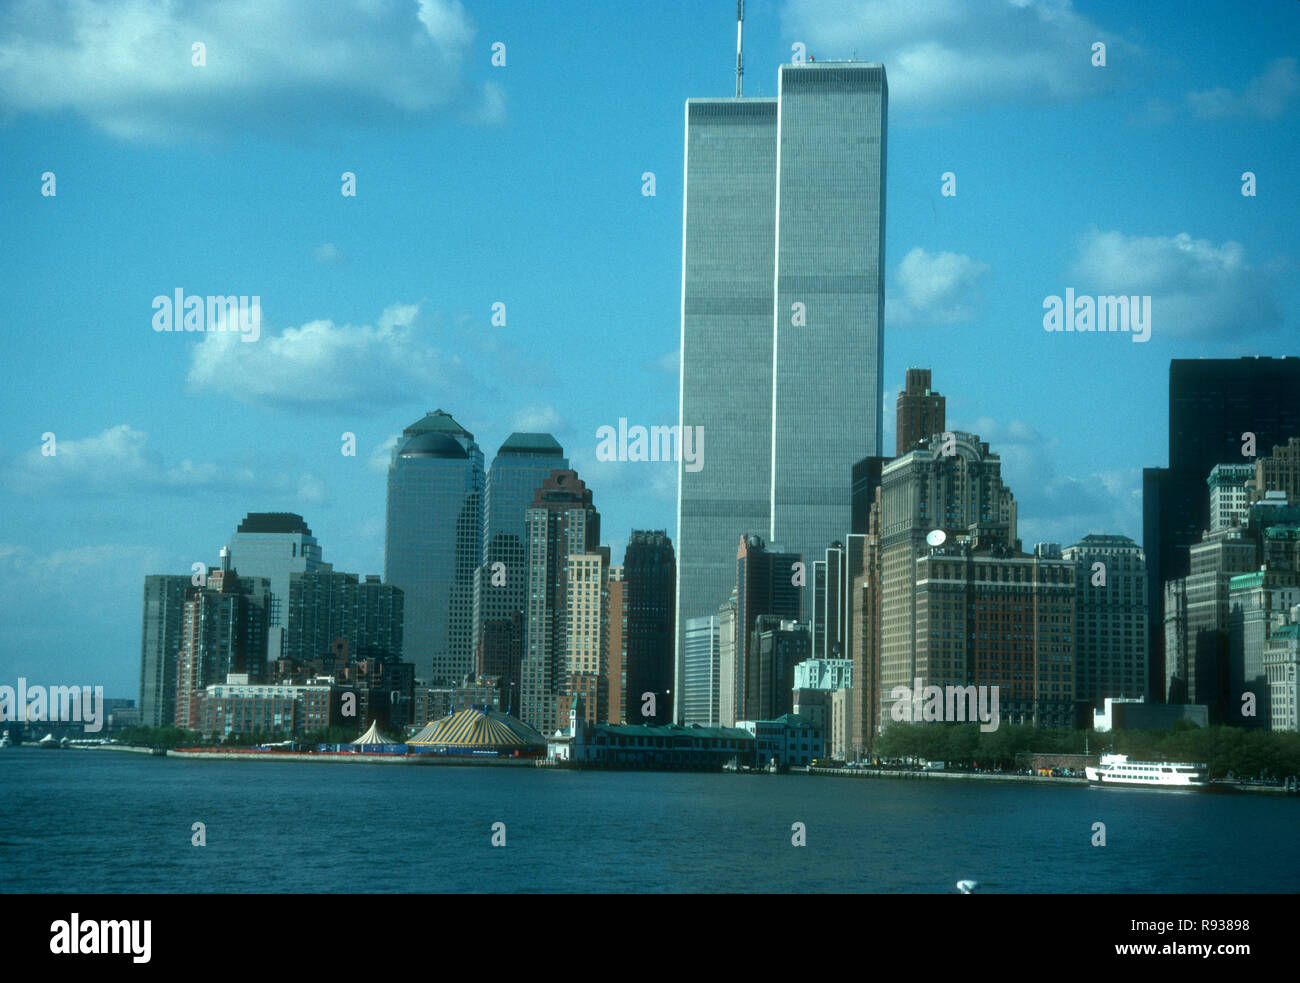 NEW YORK, NY - MAY 6: (EXCLUSIVE) A general view of the Twin Towers and NYC Skyline on May 6, 1993 in New York, New York. Photo by Barry King/Alamy Stock Photo Stock Photo